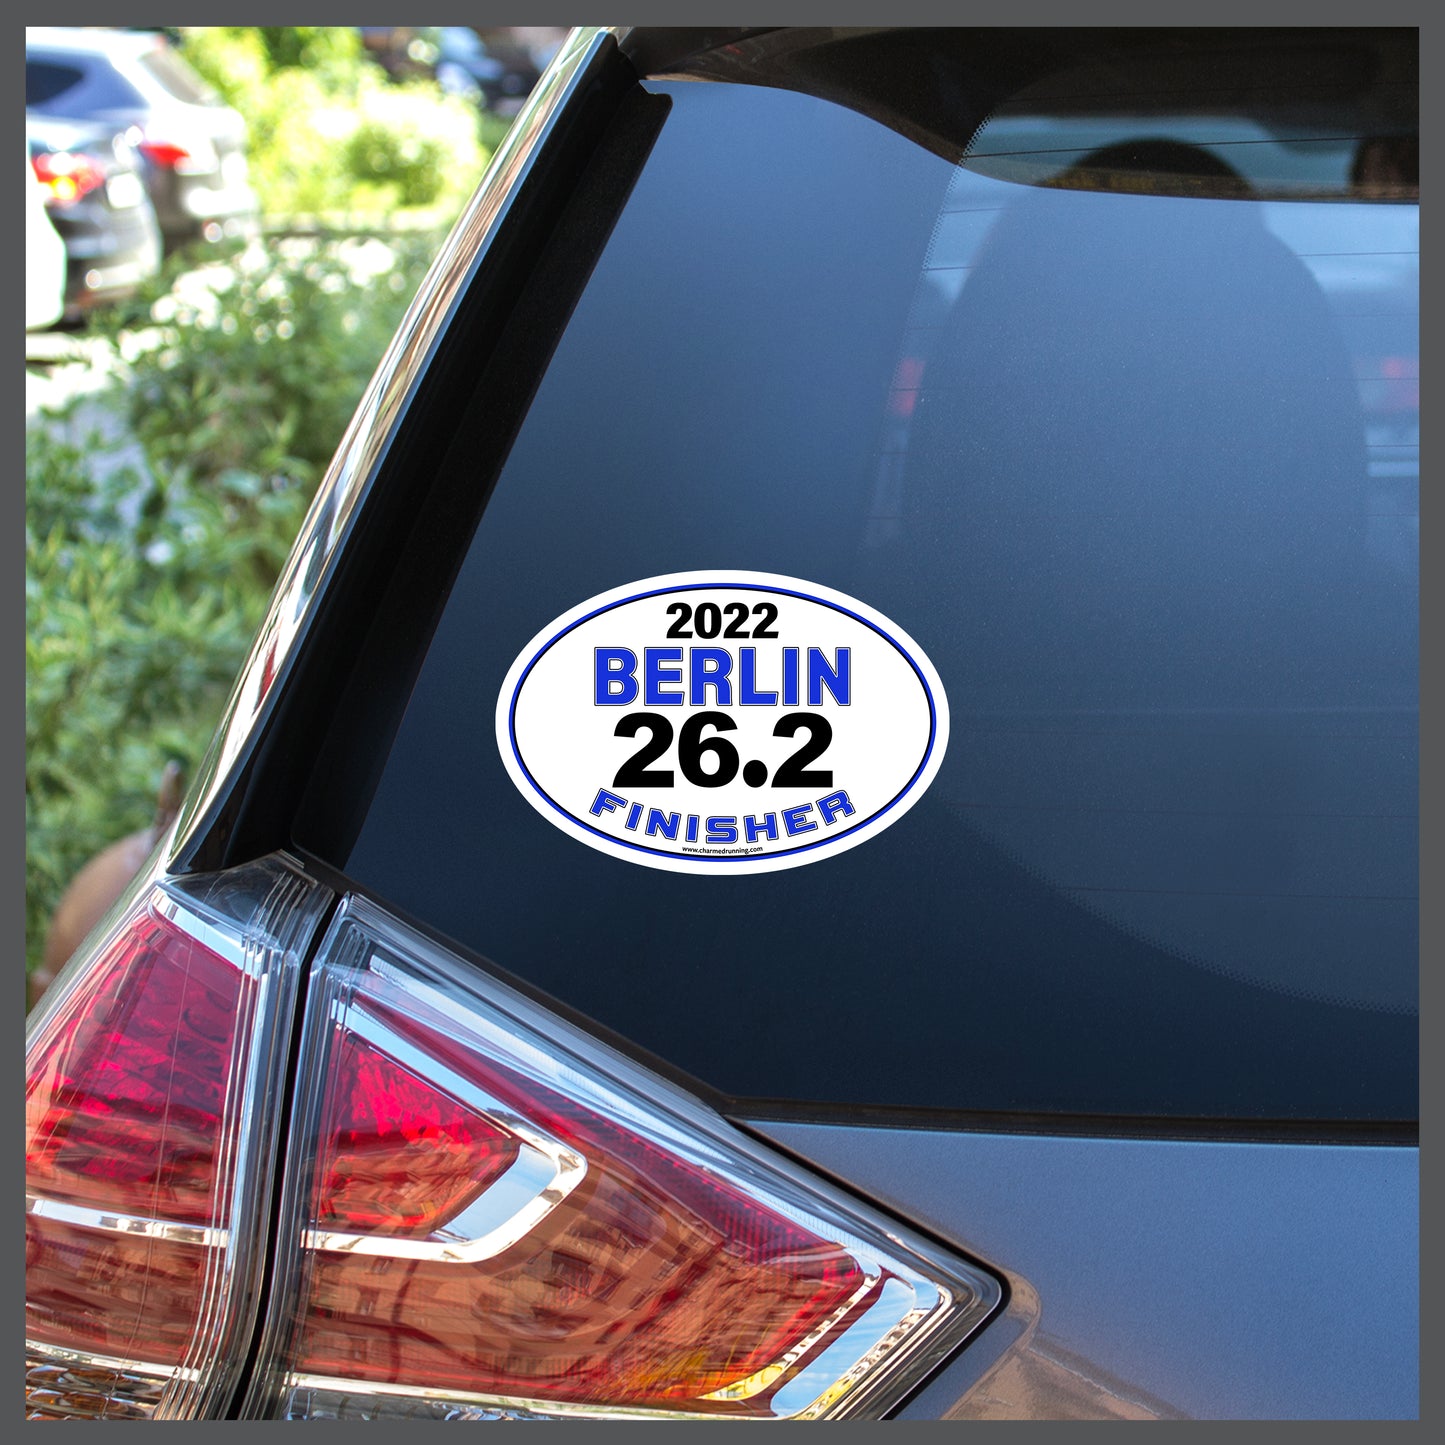 Berlin 26.2 Marathon FINISHER Decal or Car Magnet with Custom Year Option